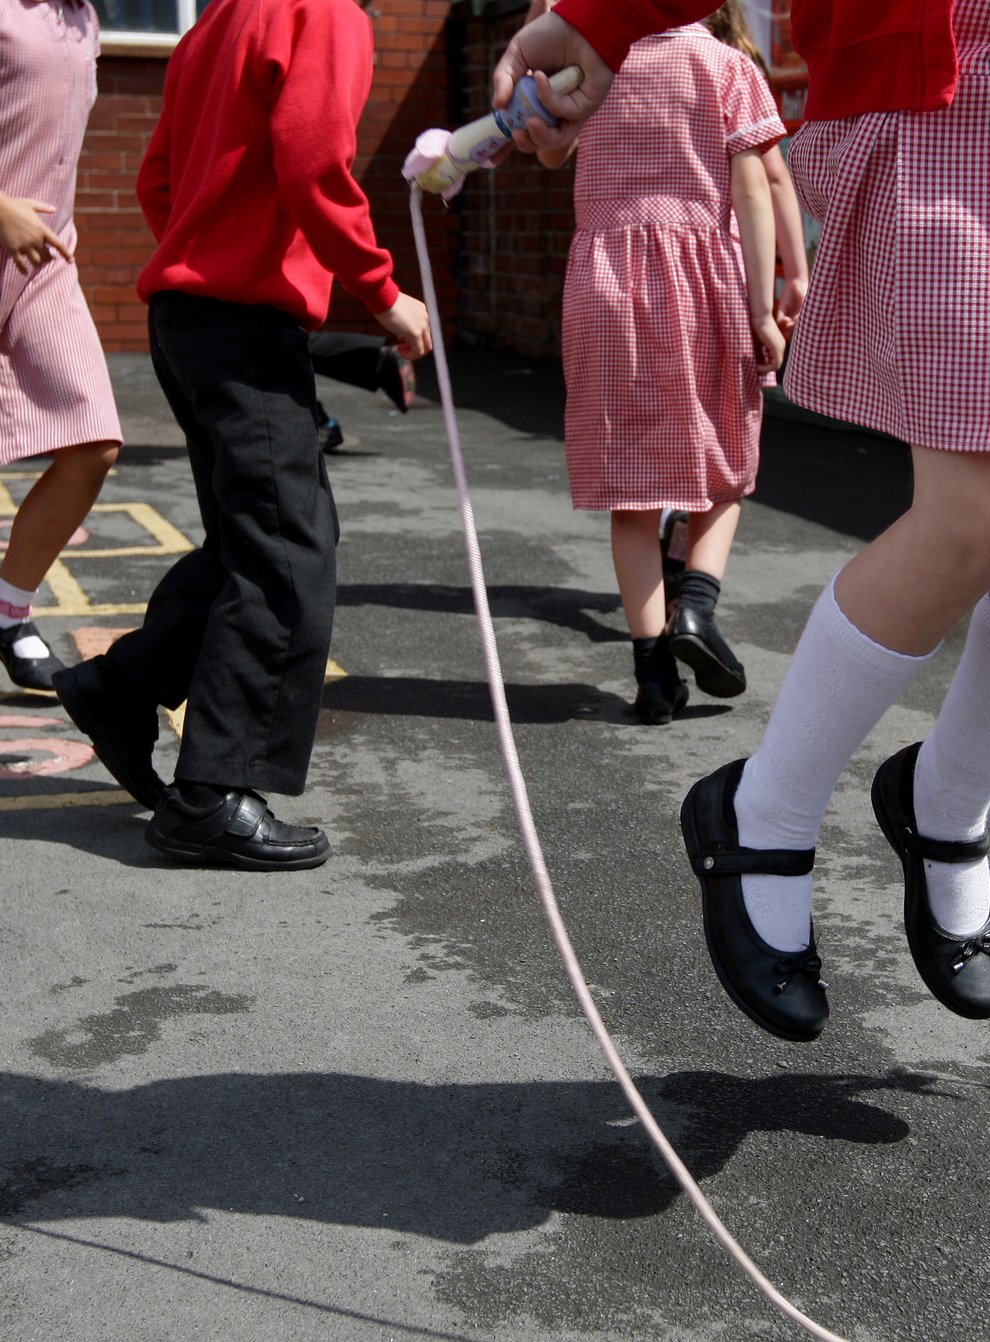 Long Covid symptoms in children rarely persist beyond 12 weeks, study suggests (Dave Thompson/PA)